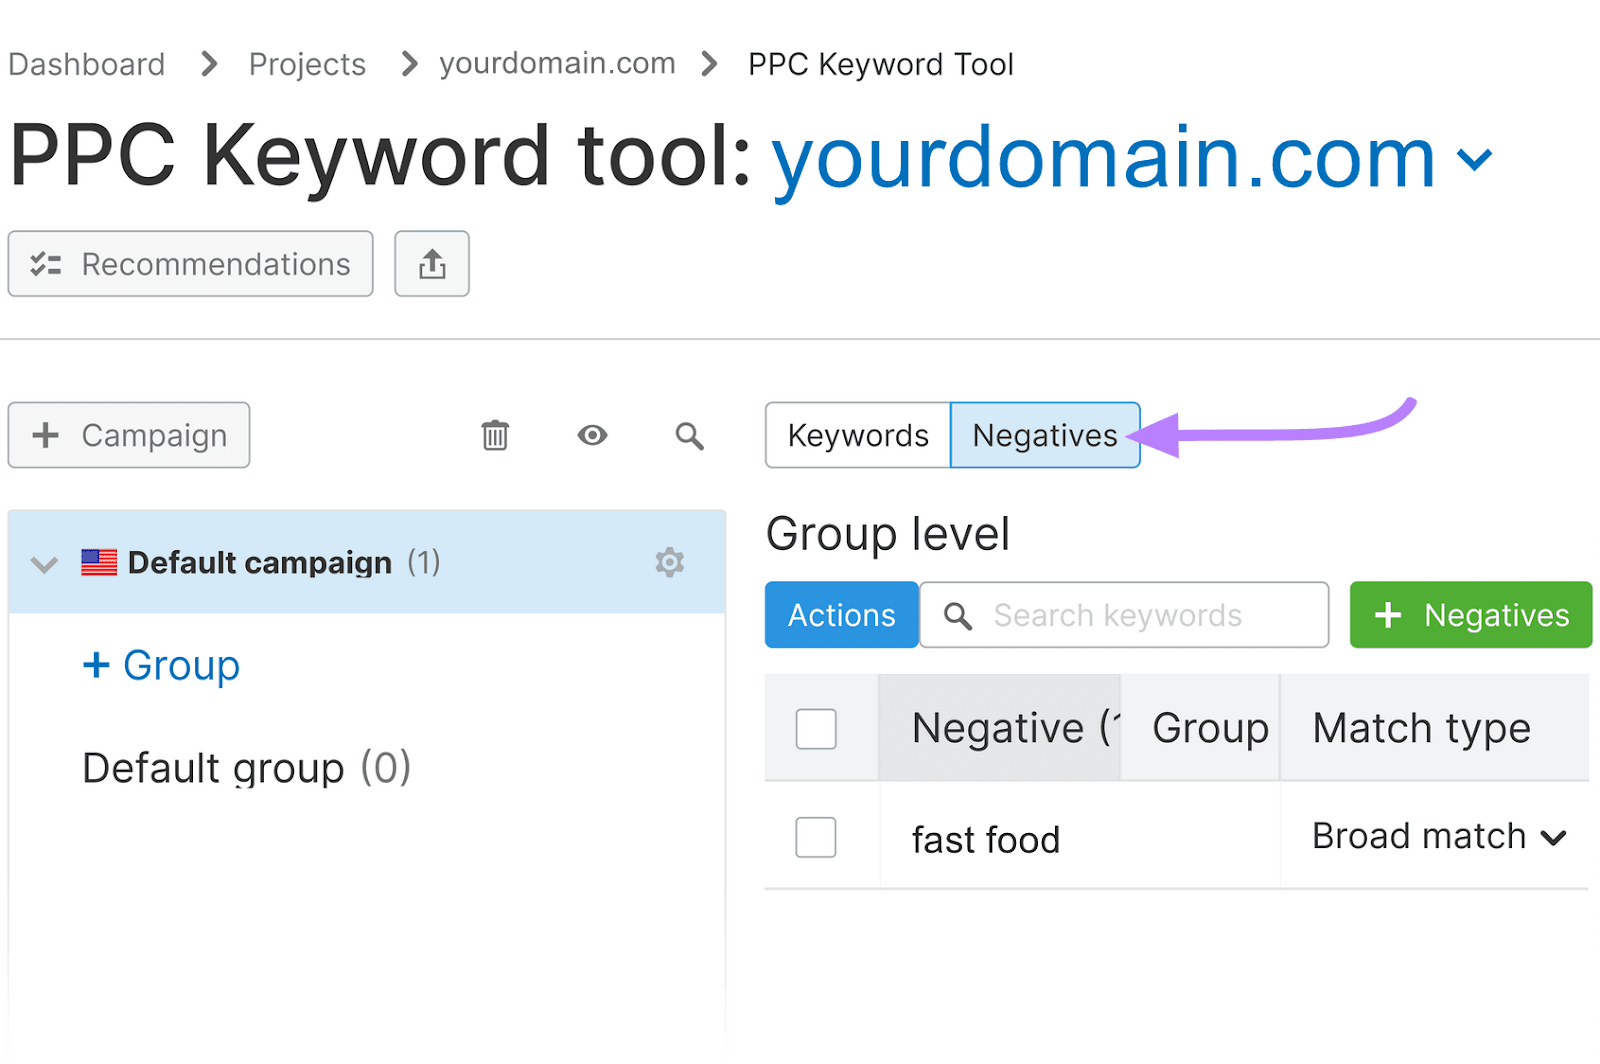 "Negatives" selected from PPC Keyword Tool dashboard